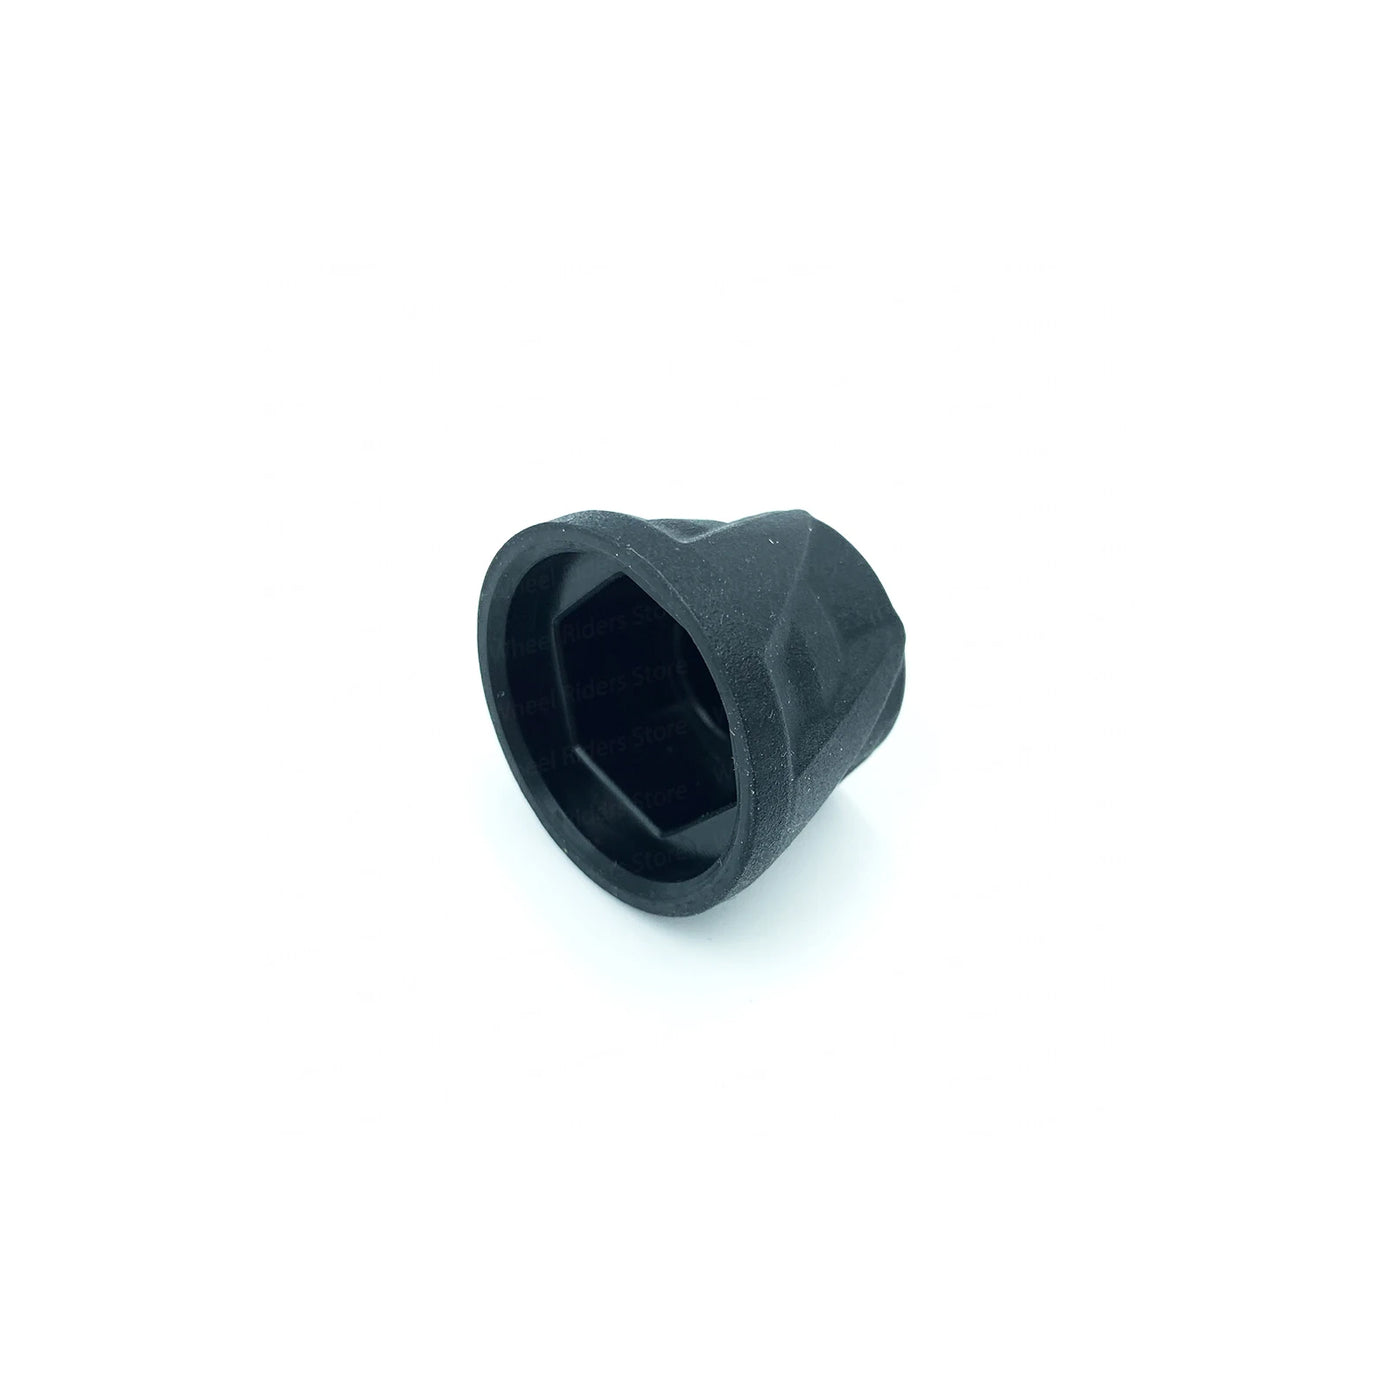 Black wheel nut cover for Kaabo Wolf Warrior X Plus electric scooter.